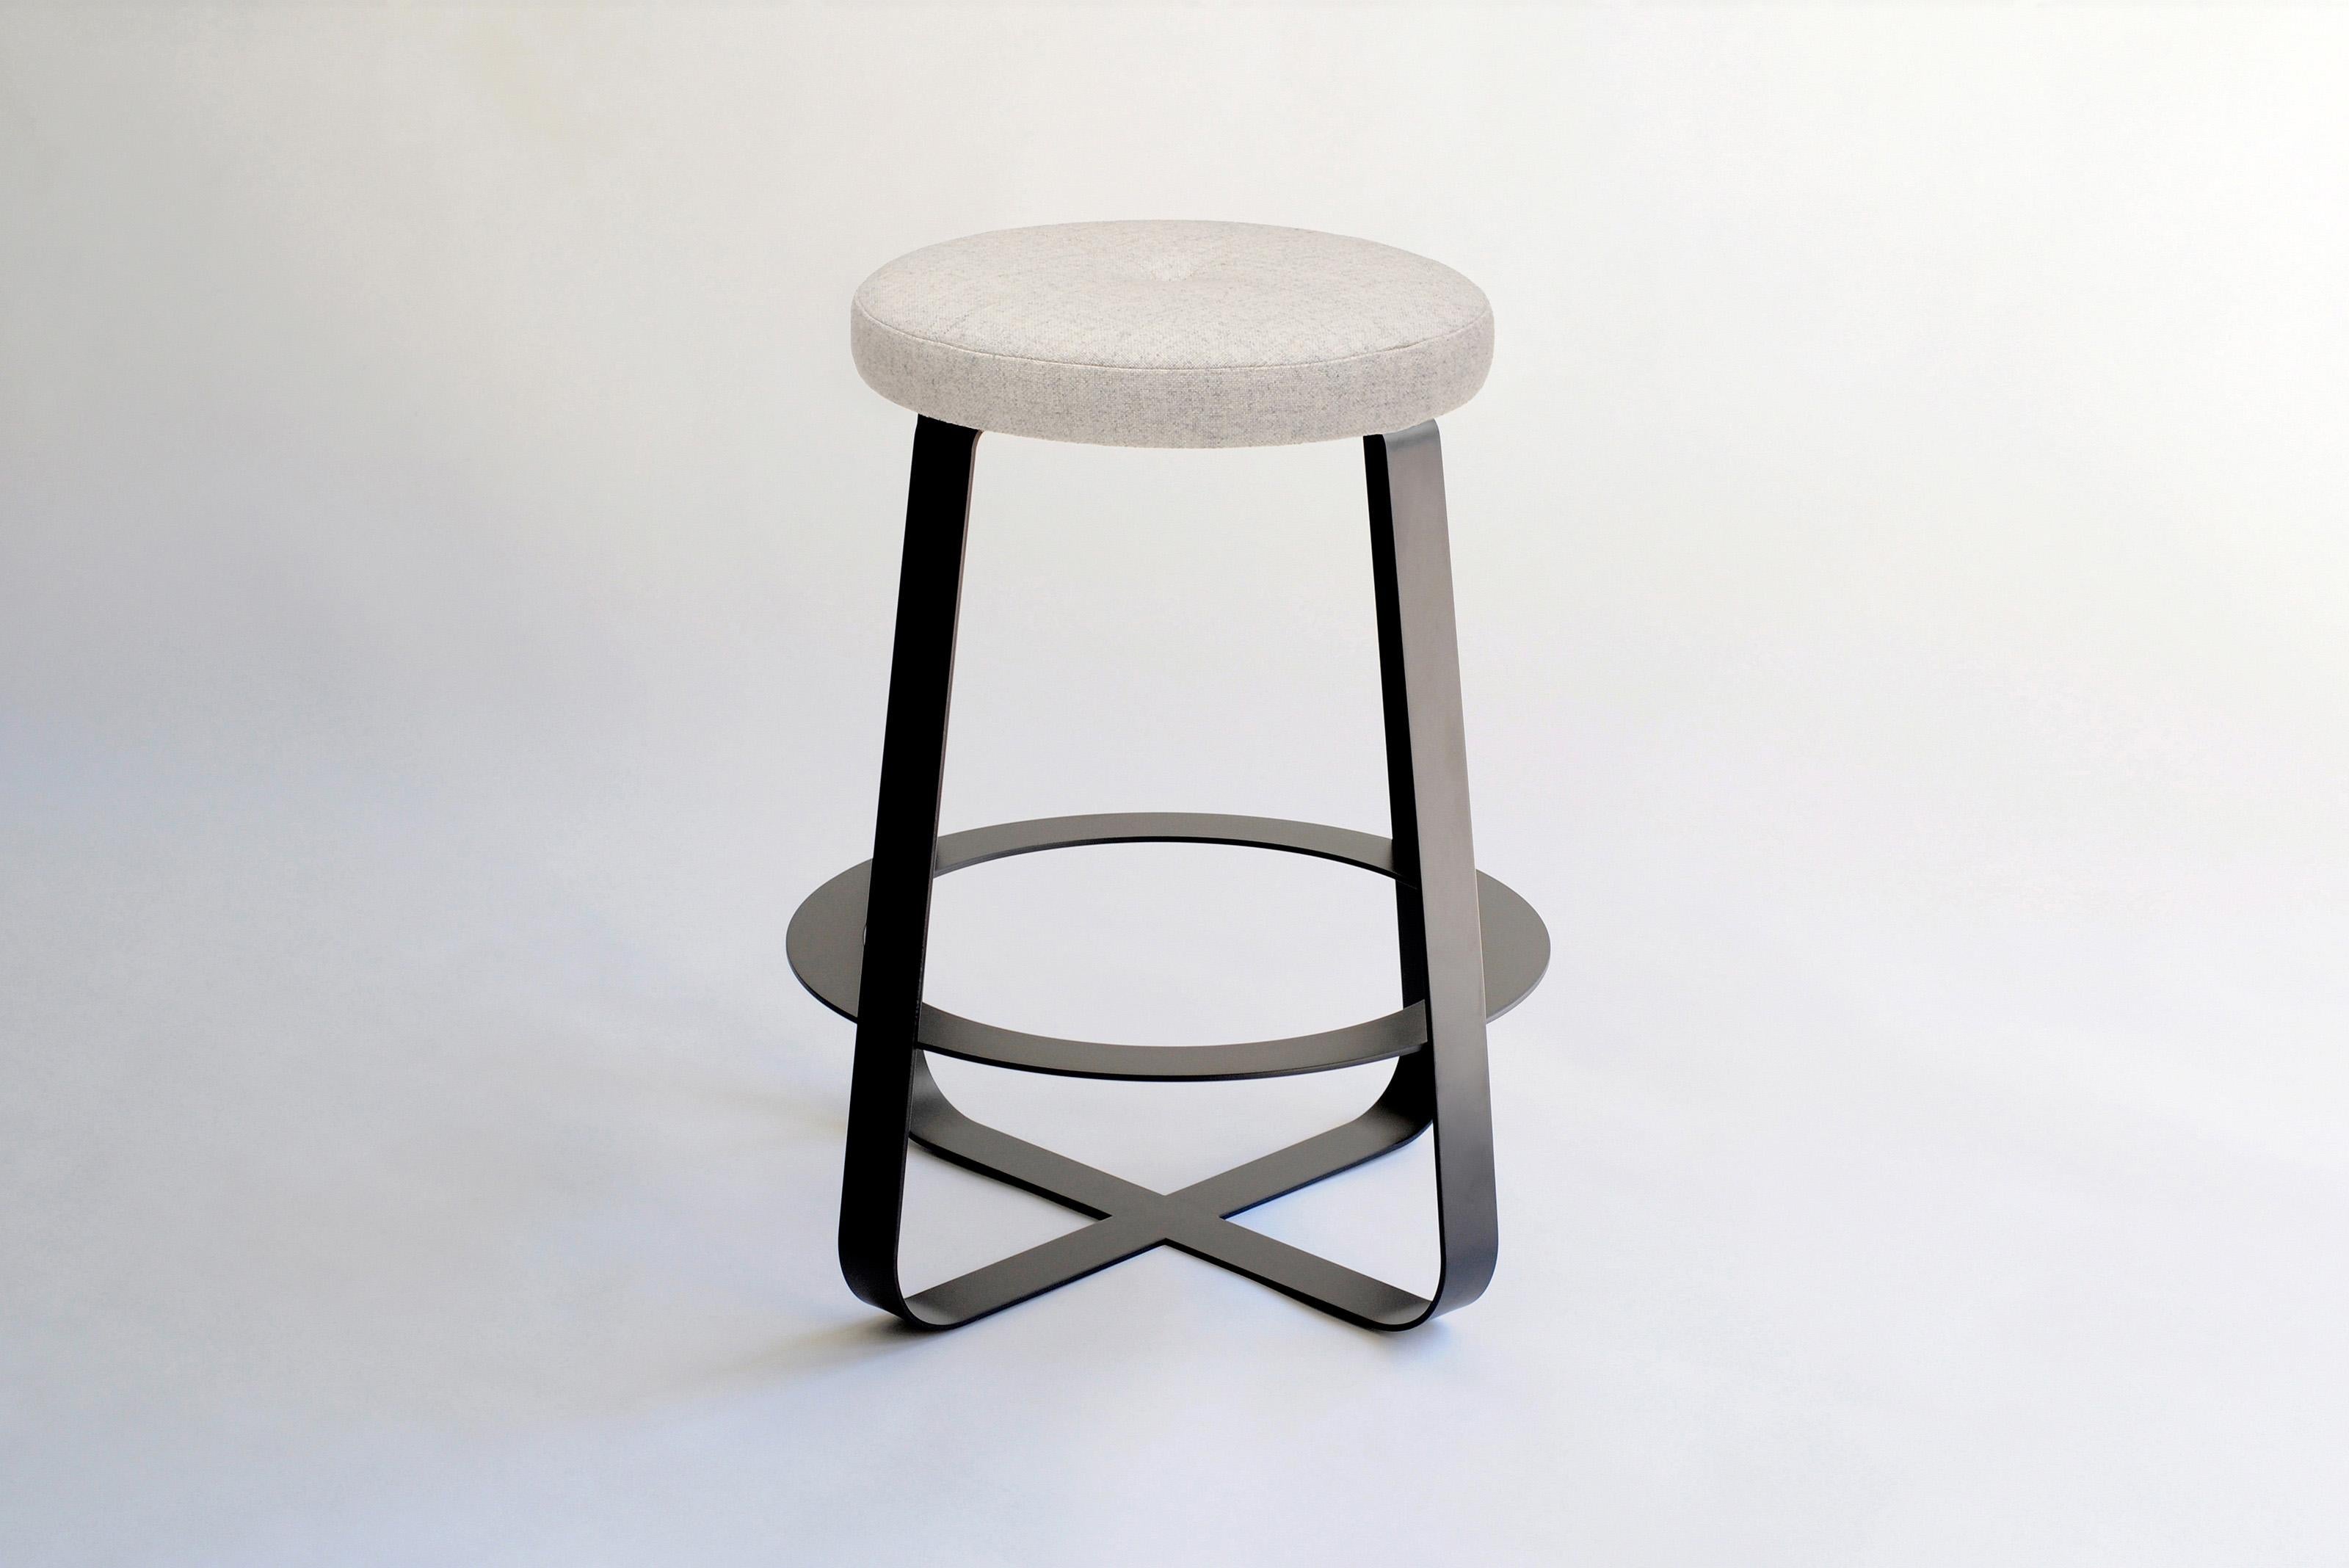 Primi Bar Stool by Phase Design
Dimensions: Ø 54.6 x H 73.7 cm. 
Materials: Powder-coated steel and upholstery.

Solid steel flat bar available in a flat black or white powder coat finish with carved walnut, white ash, or upholstered top. Powder